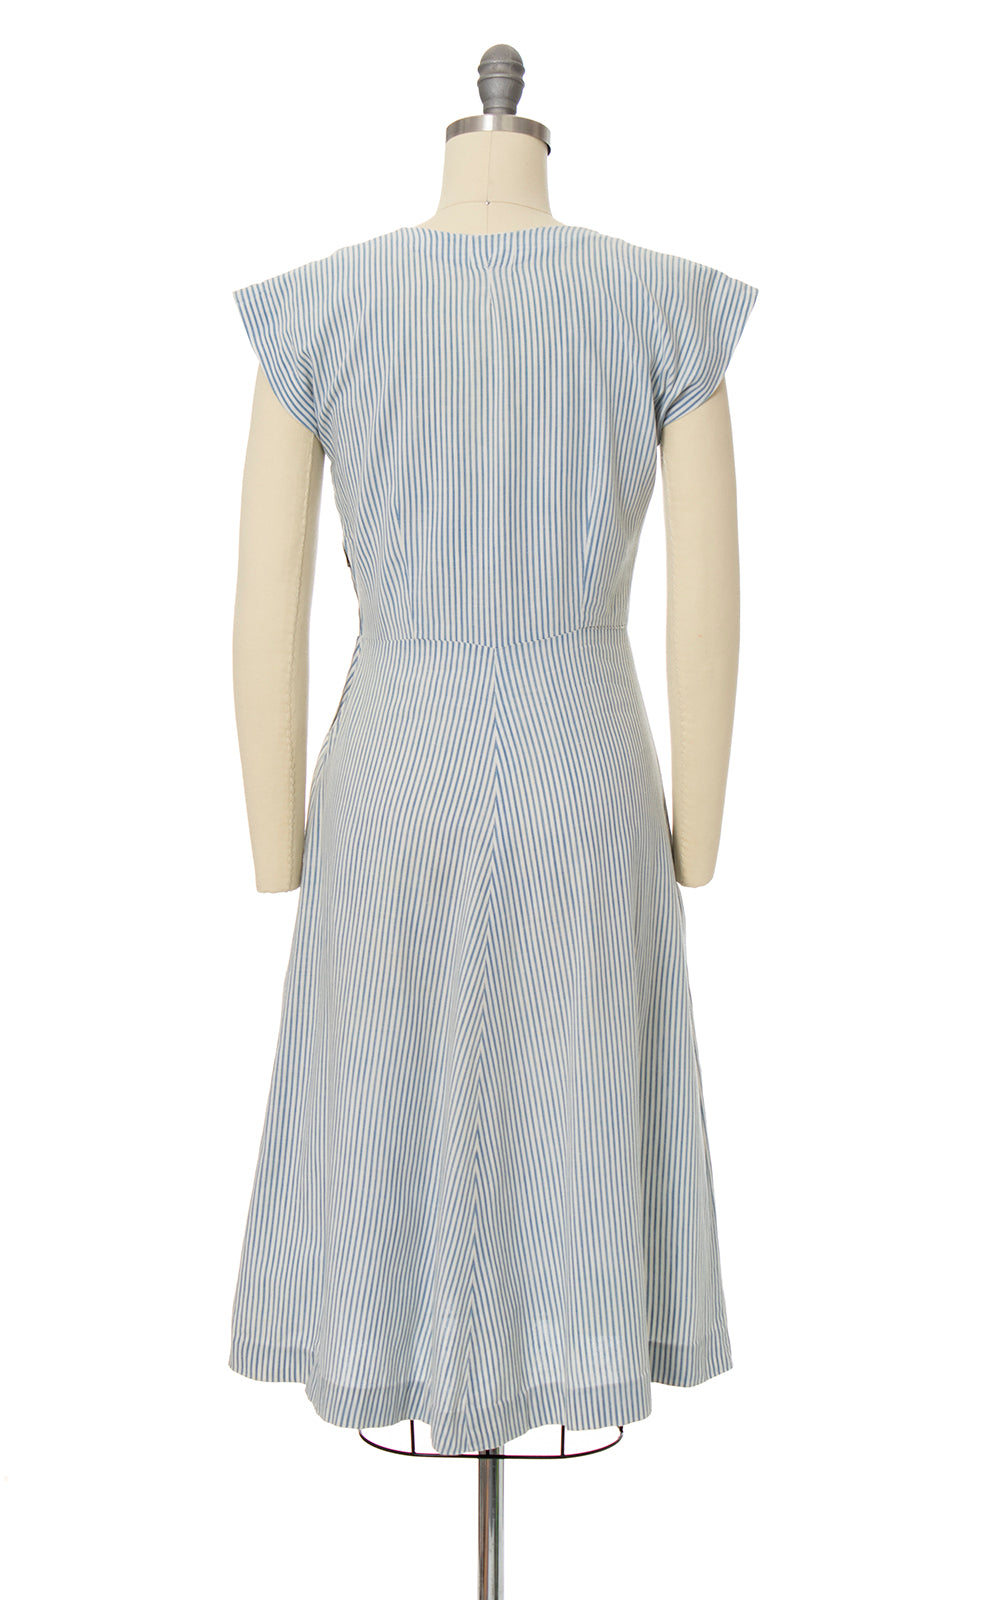 1930s 1940s Floral Appliqué Dress with Pockets | x-small/small